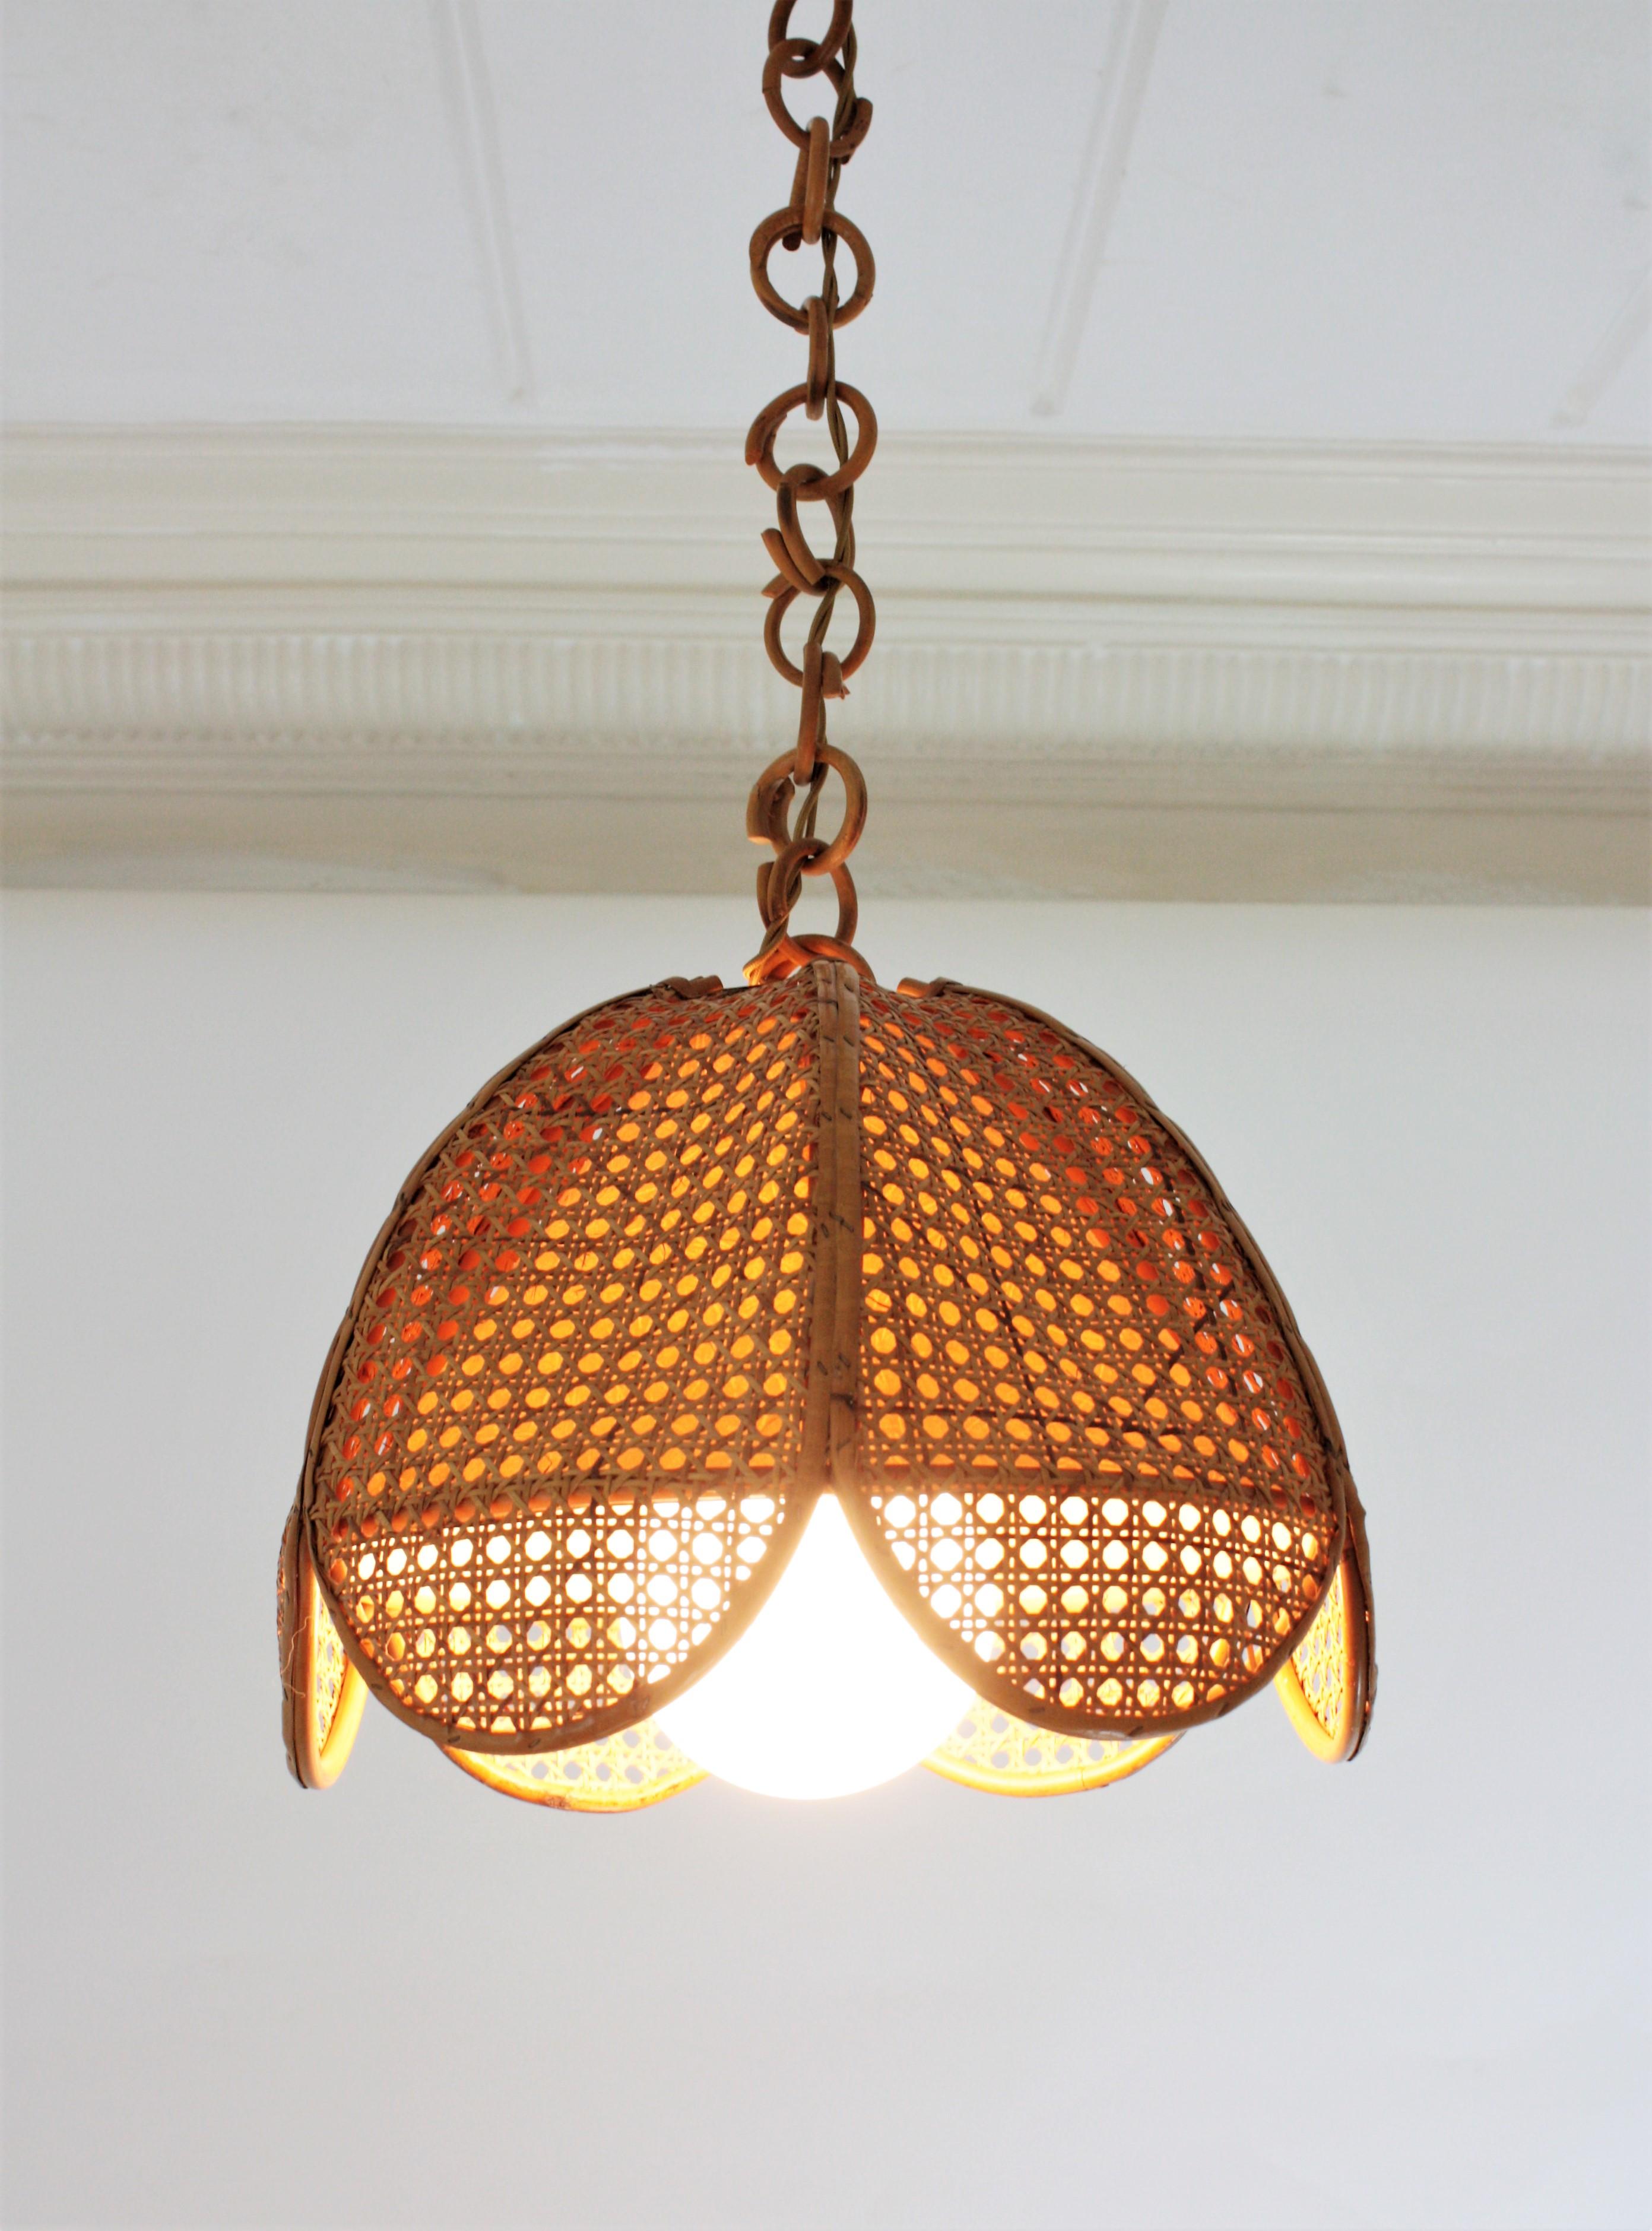 Hand-Crafted Spanish Modernist Woven Wicker Rattan Palm Pendant Light, 1960s For Sale